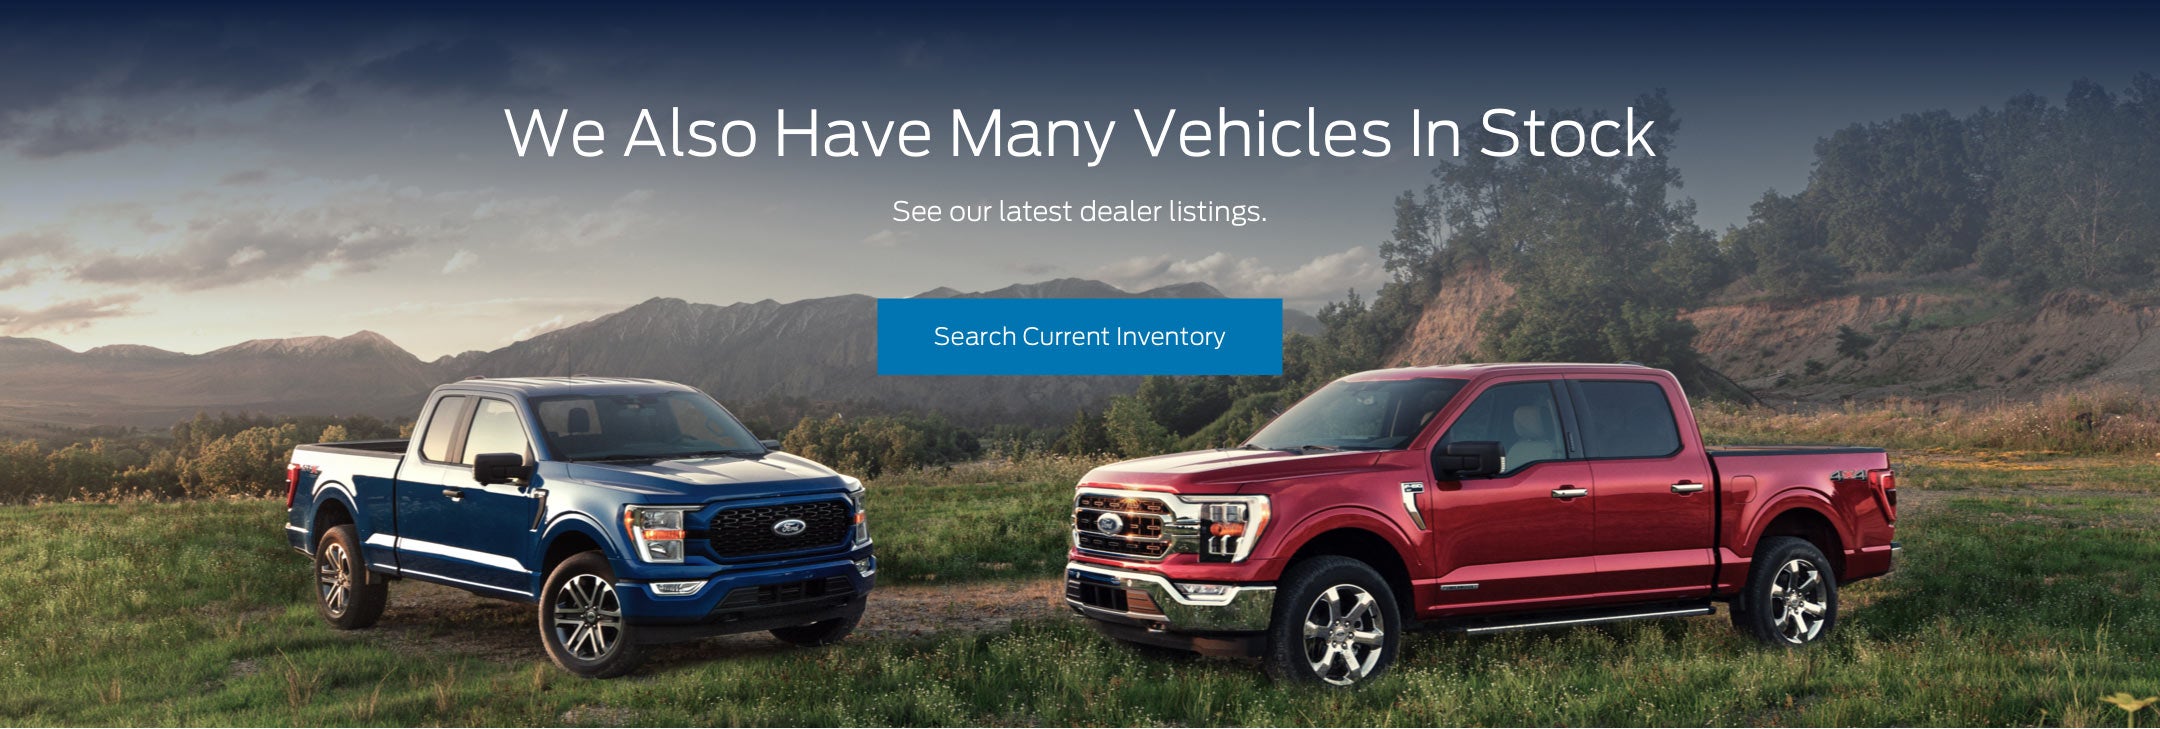 Ford vehicles in stock | Burns Ford of York in York SC